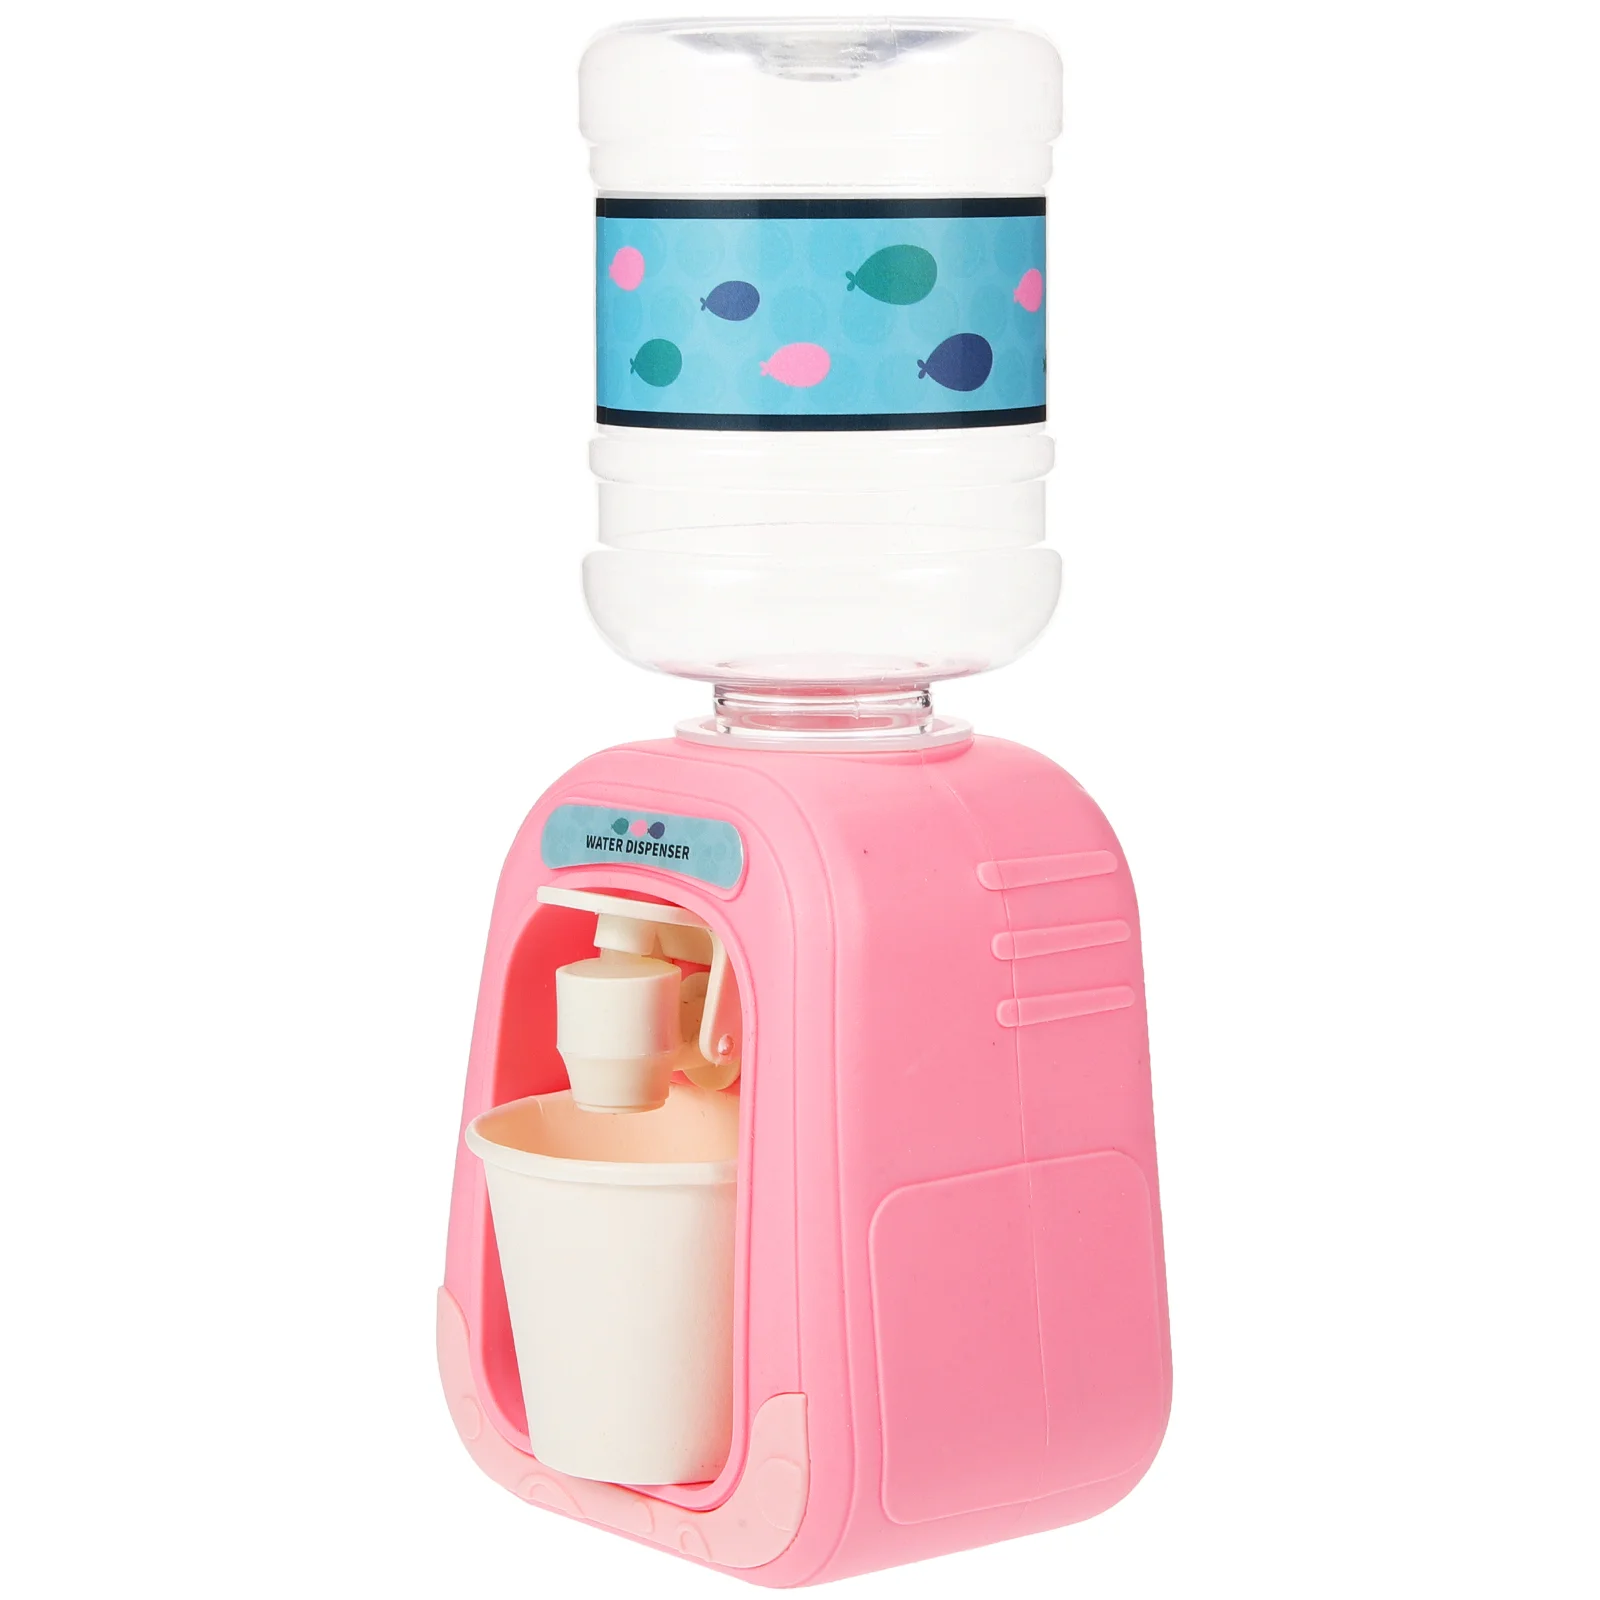 Miniature Water Dispenser House Simulation Candy Fun Drinking Machine Food Play Scene Props Matching Model (Pink) Models water filter replacement compatible models lt500p gen11042fr 08 2 water purifier for drinking water filter distiller aquari